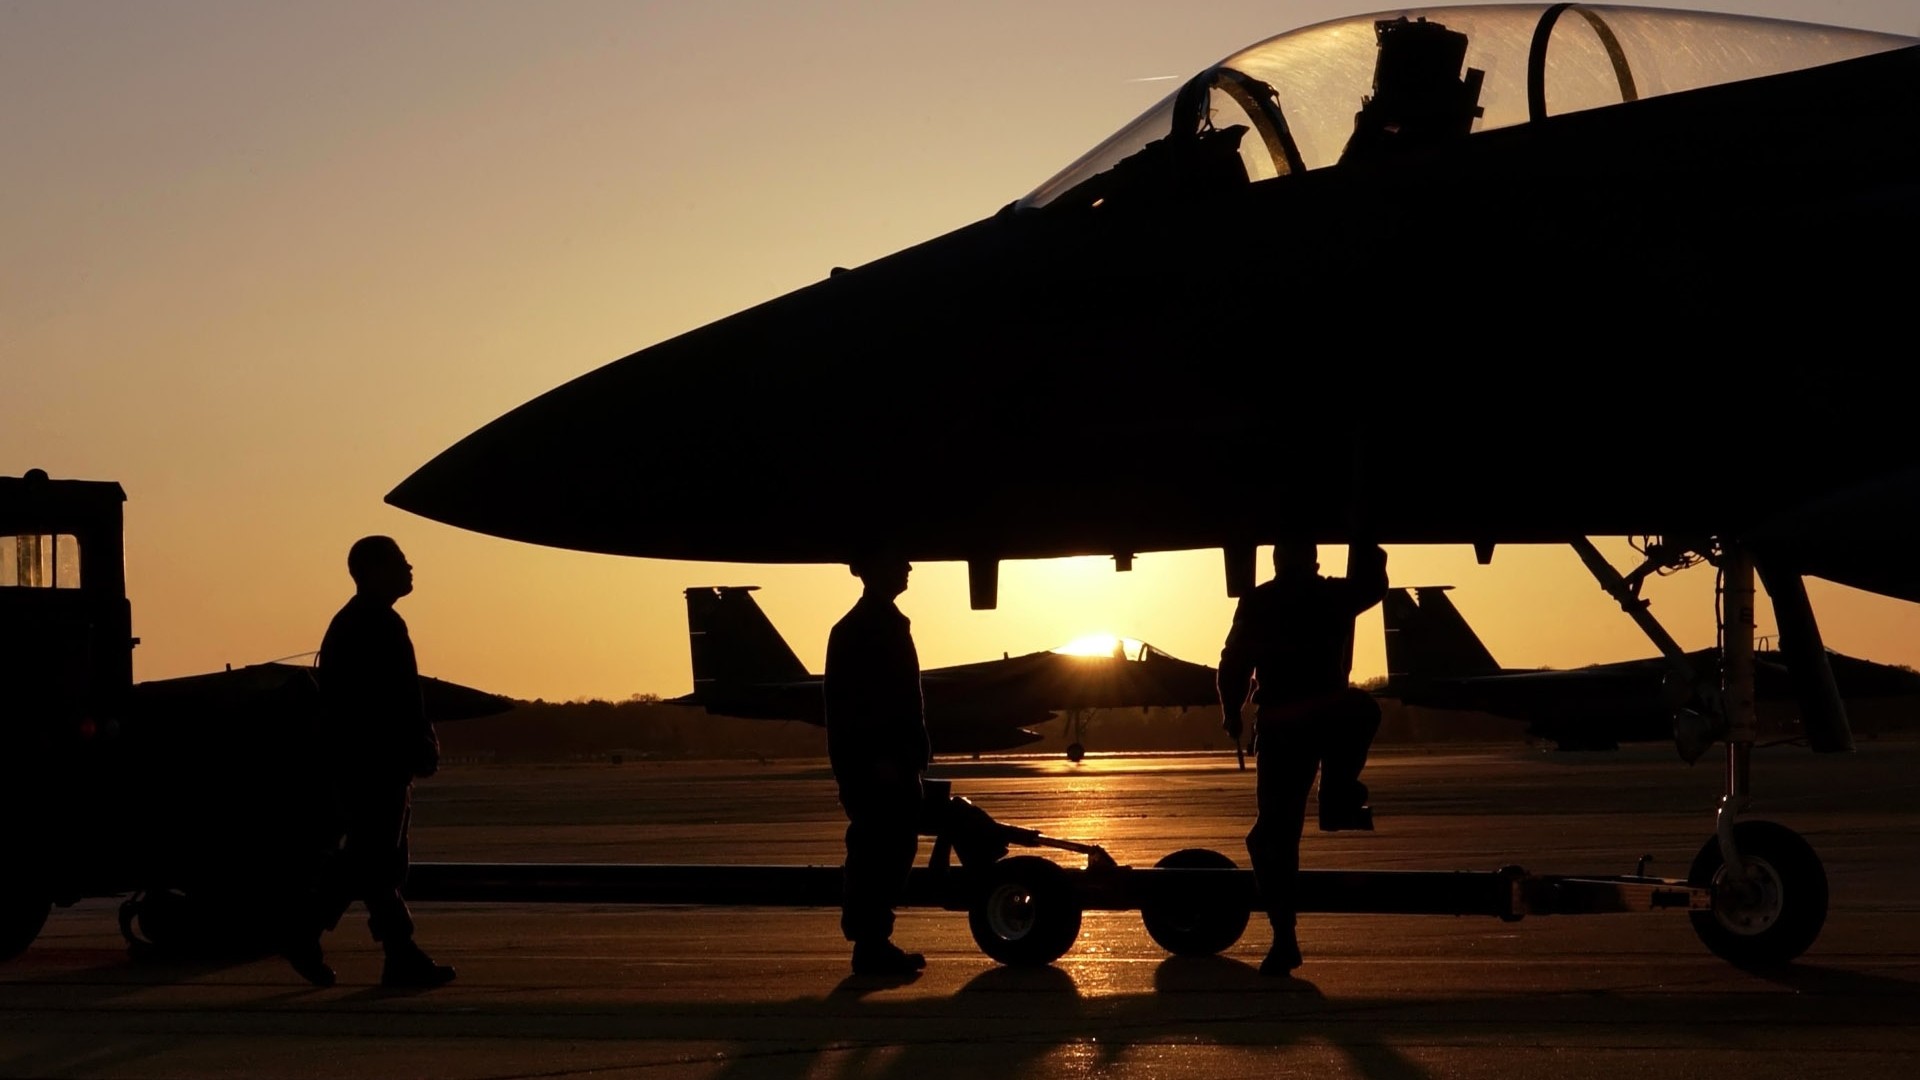 Military aircraft silhouette photo